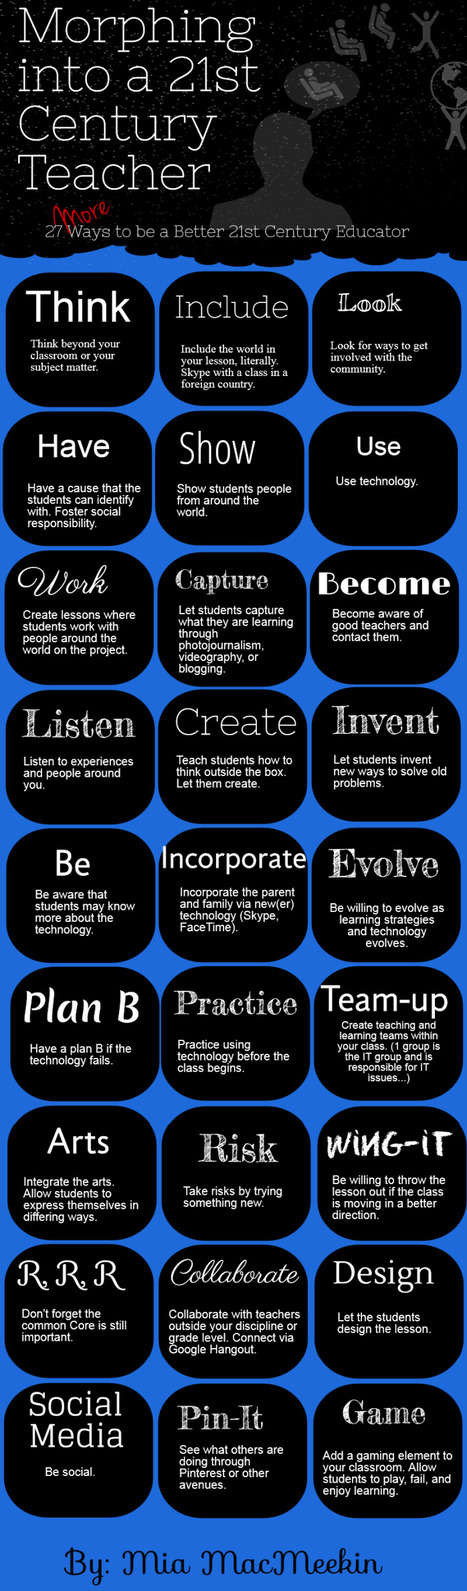 27 Tips For Becoming A Digital Teacher - Edudemic | 21st Century Learning and Teaching | Scoop.it